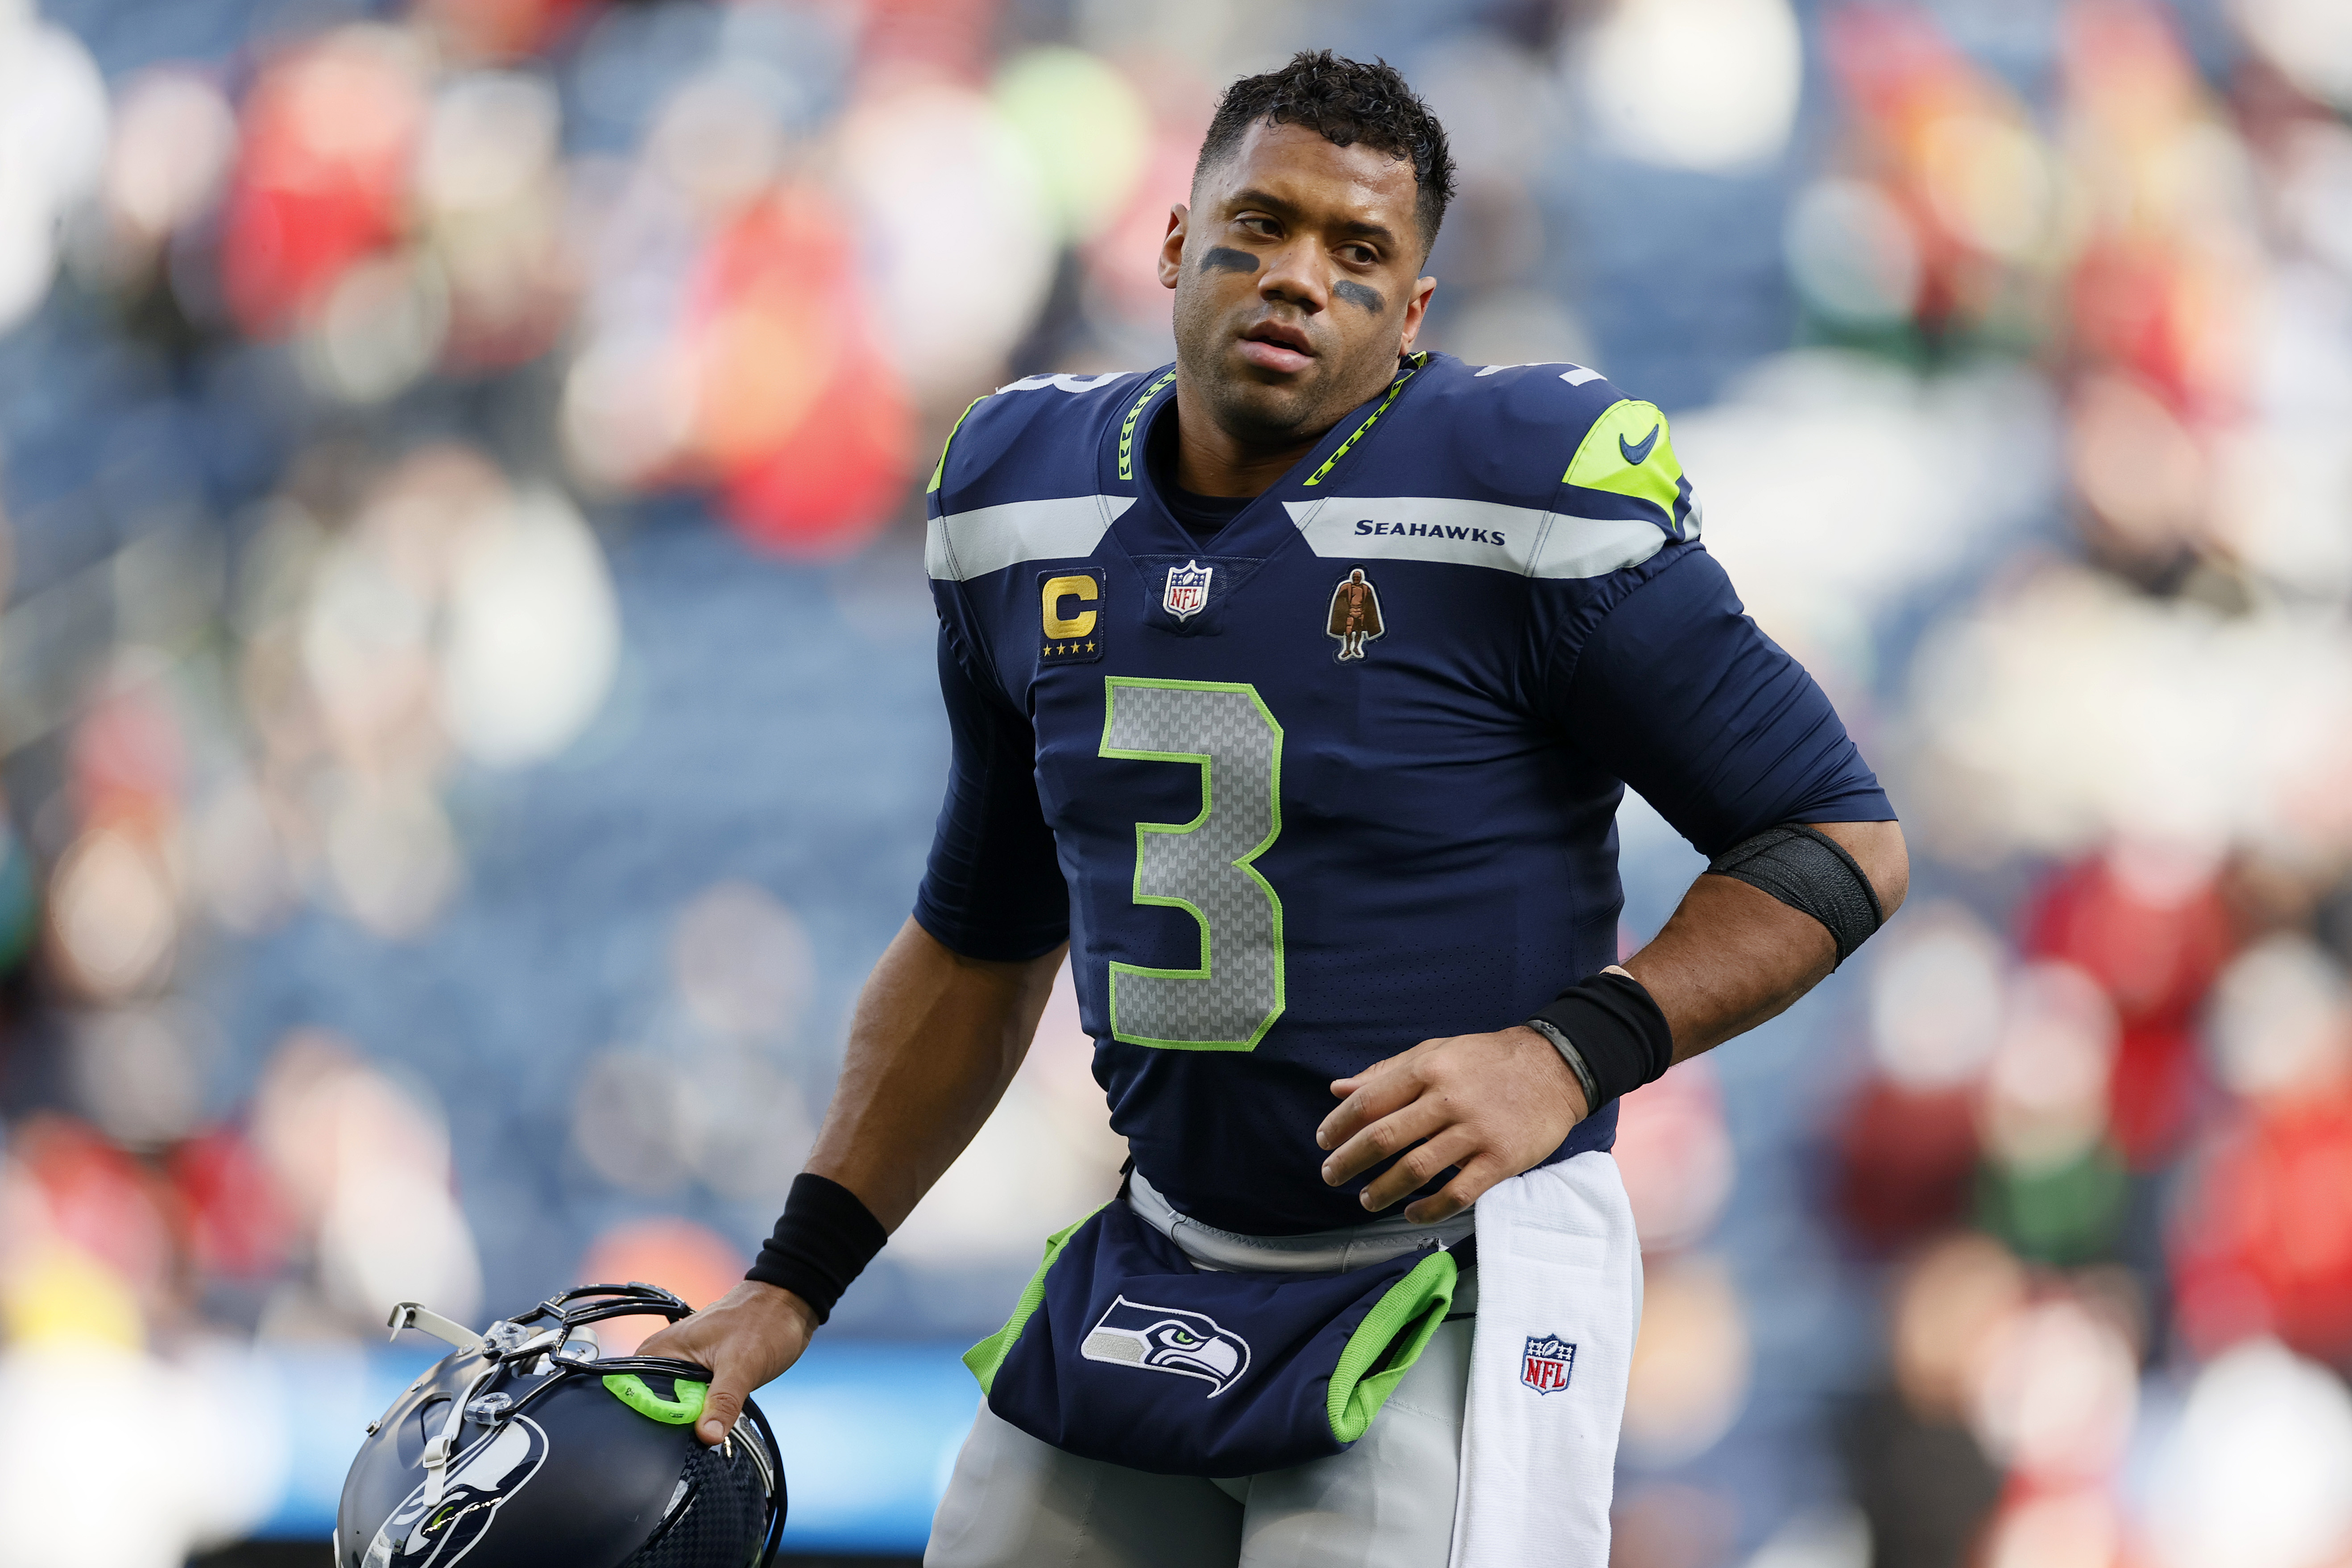 Seahawks QB Russell Wilson pops up in Broncos trade rumors.